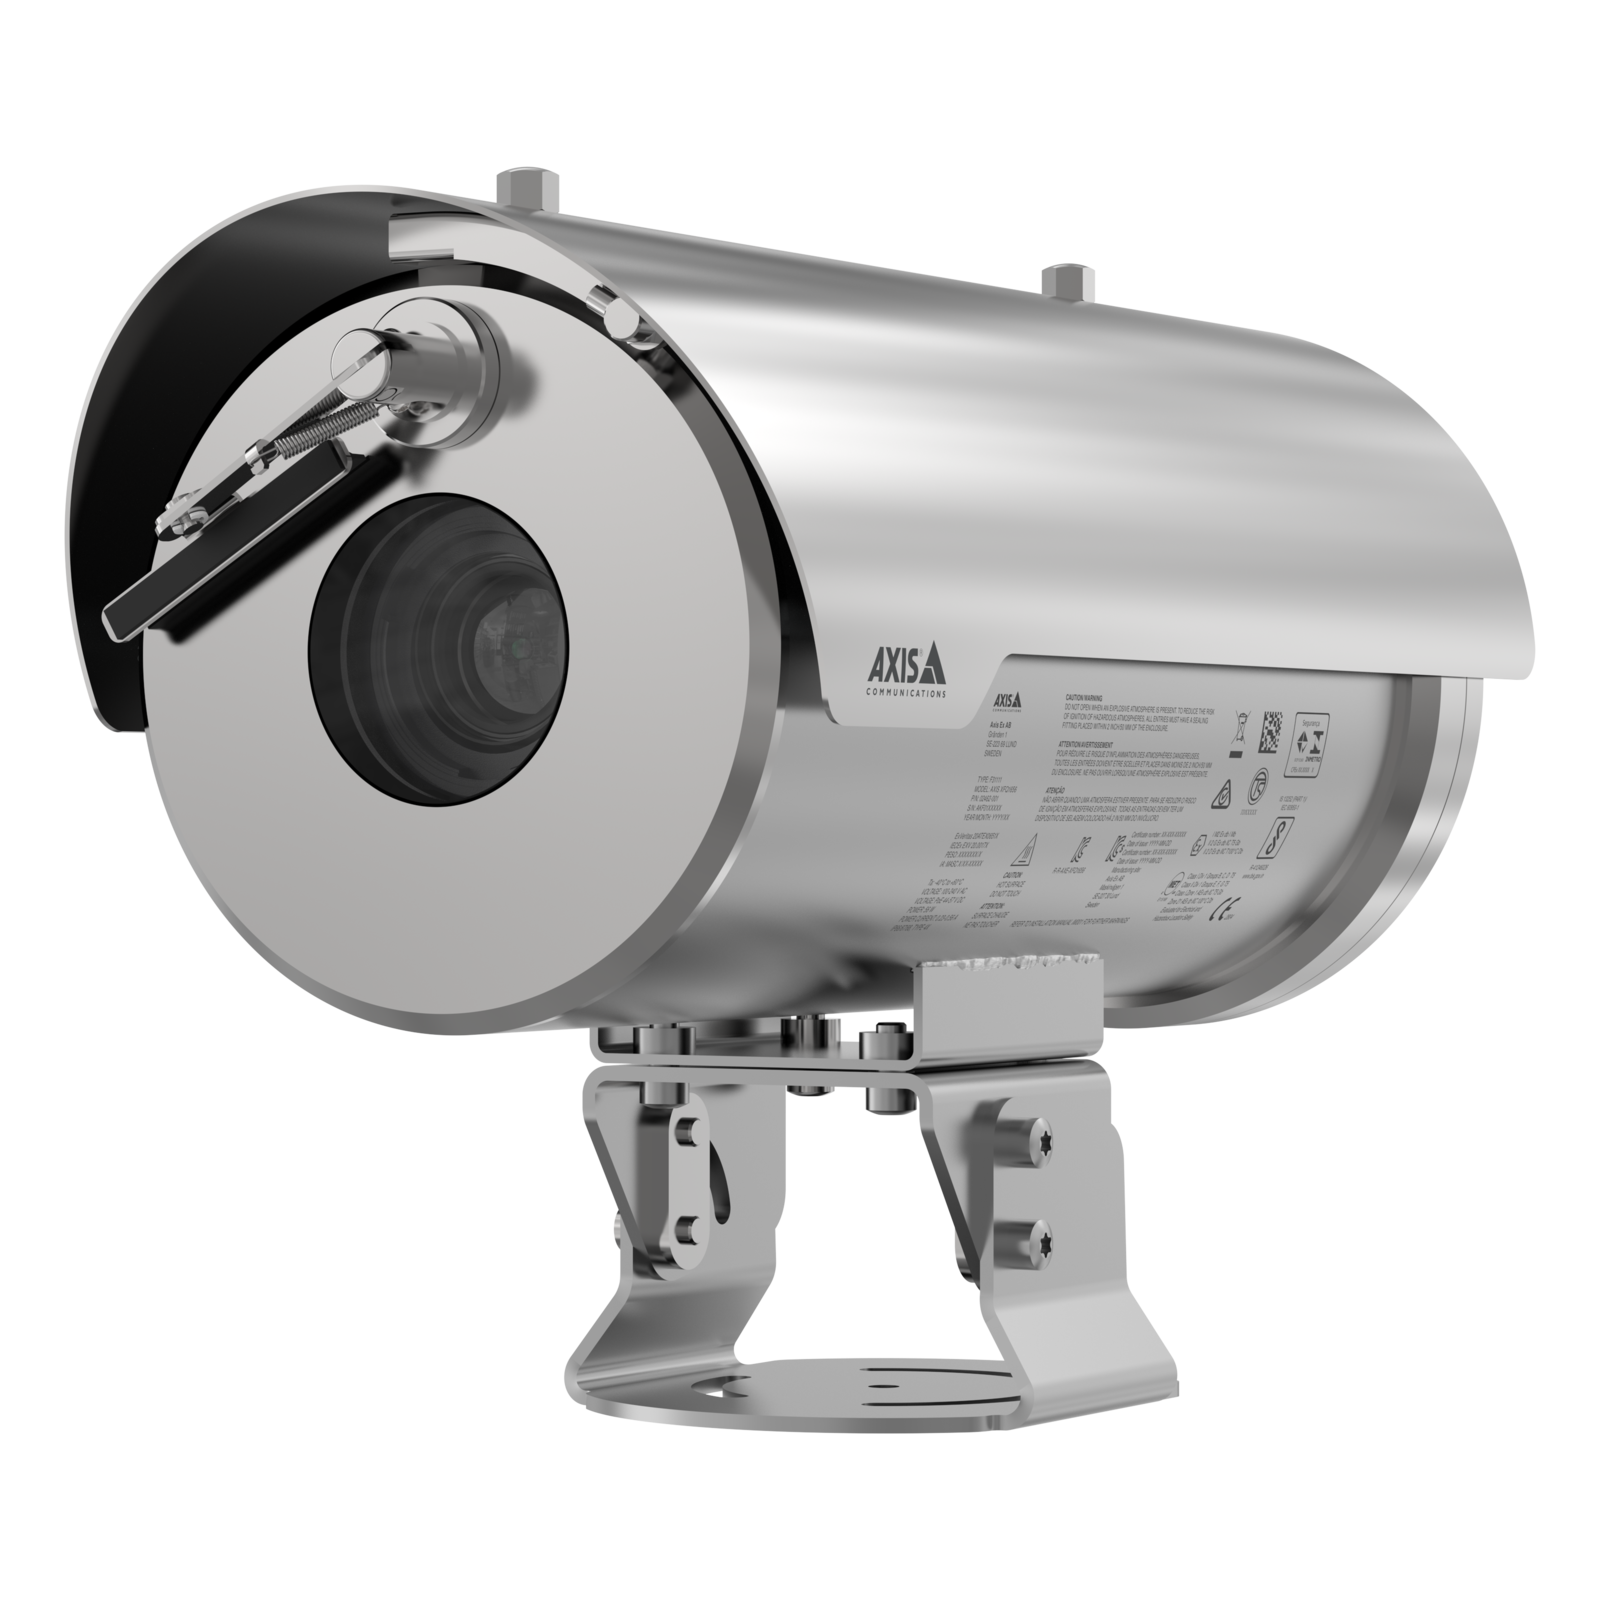 AXIS XFQ1656 Explosion-Protected Camera | Axis Communications